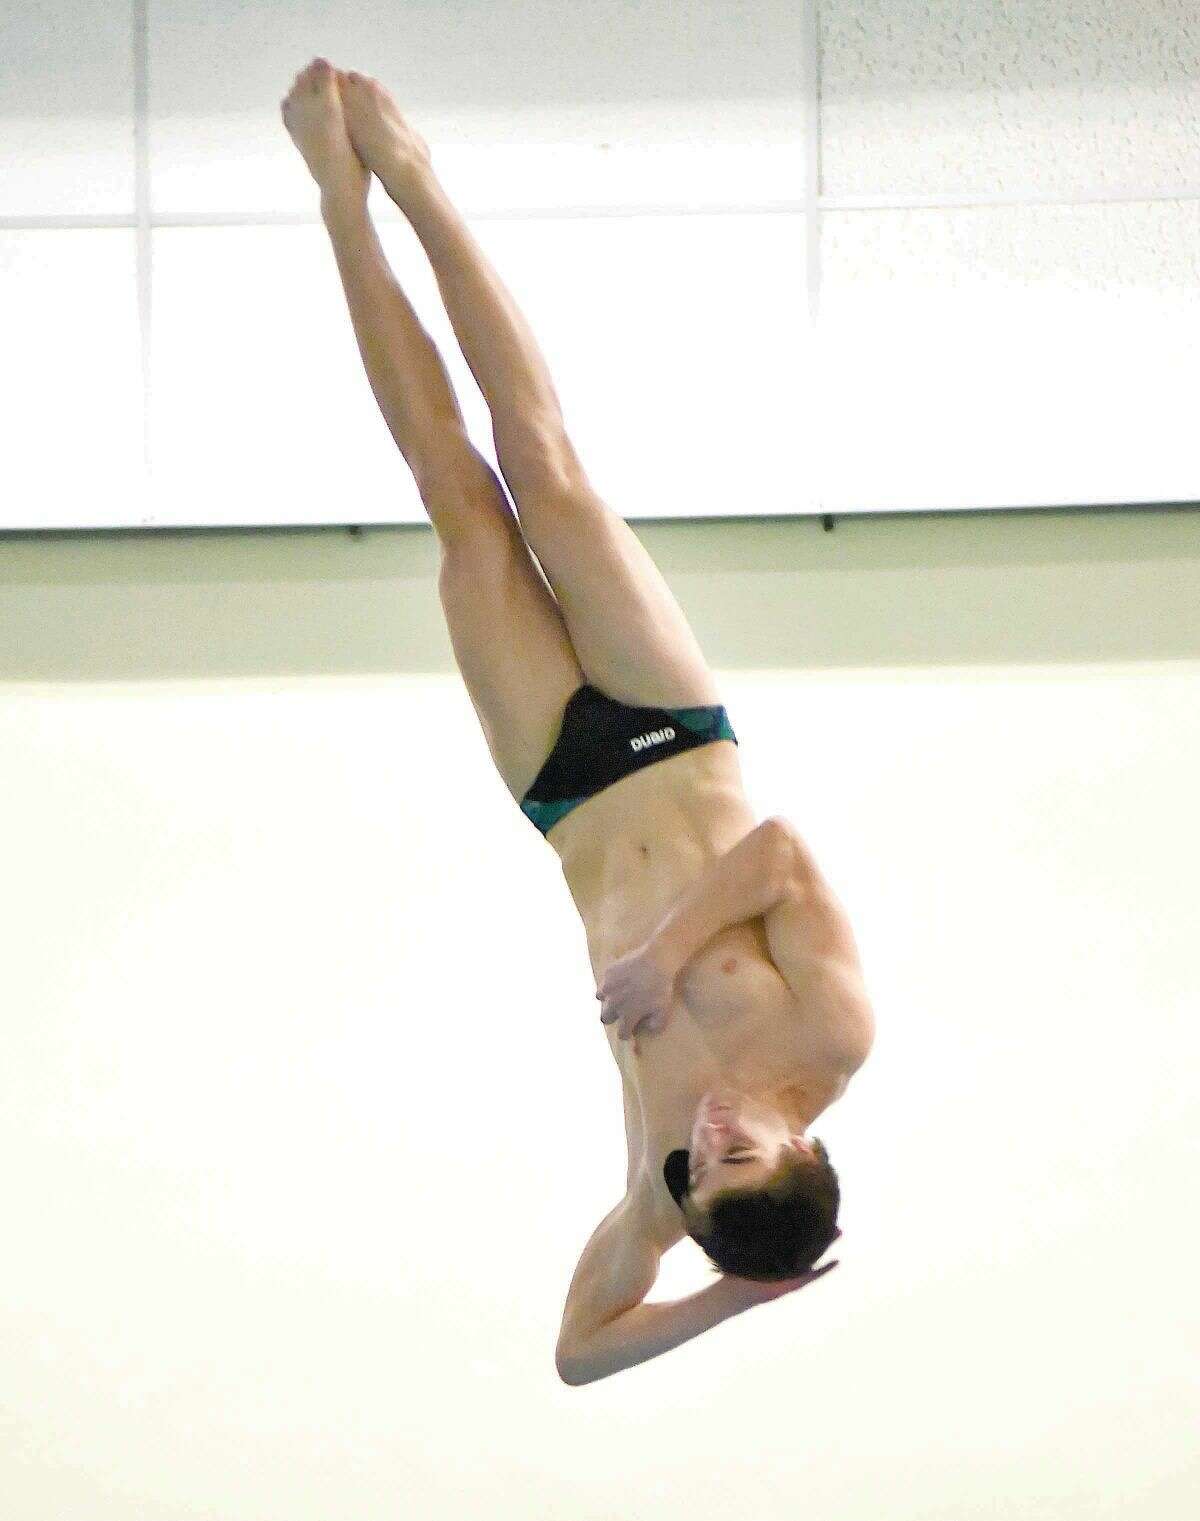 Hour photo/John Nash - Norwalk-McMahon's Kevin Bradley performs one of his 11 dives during Wednesday's FCIAC Diving championship meet at Westhill High School's pool in Stamford.